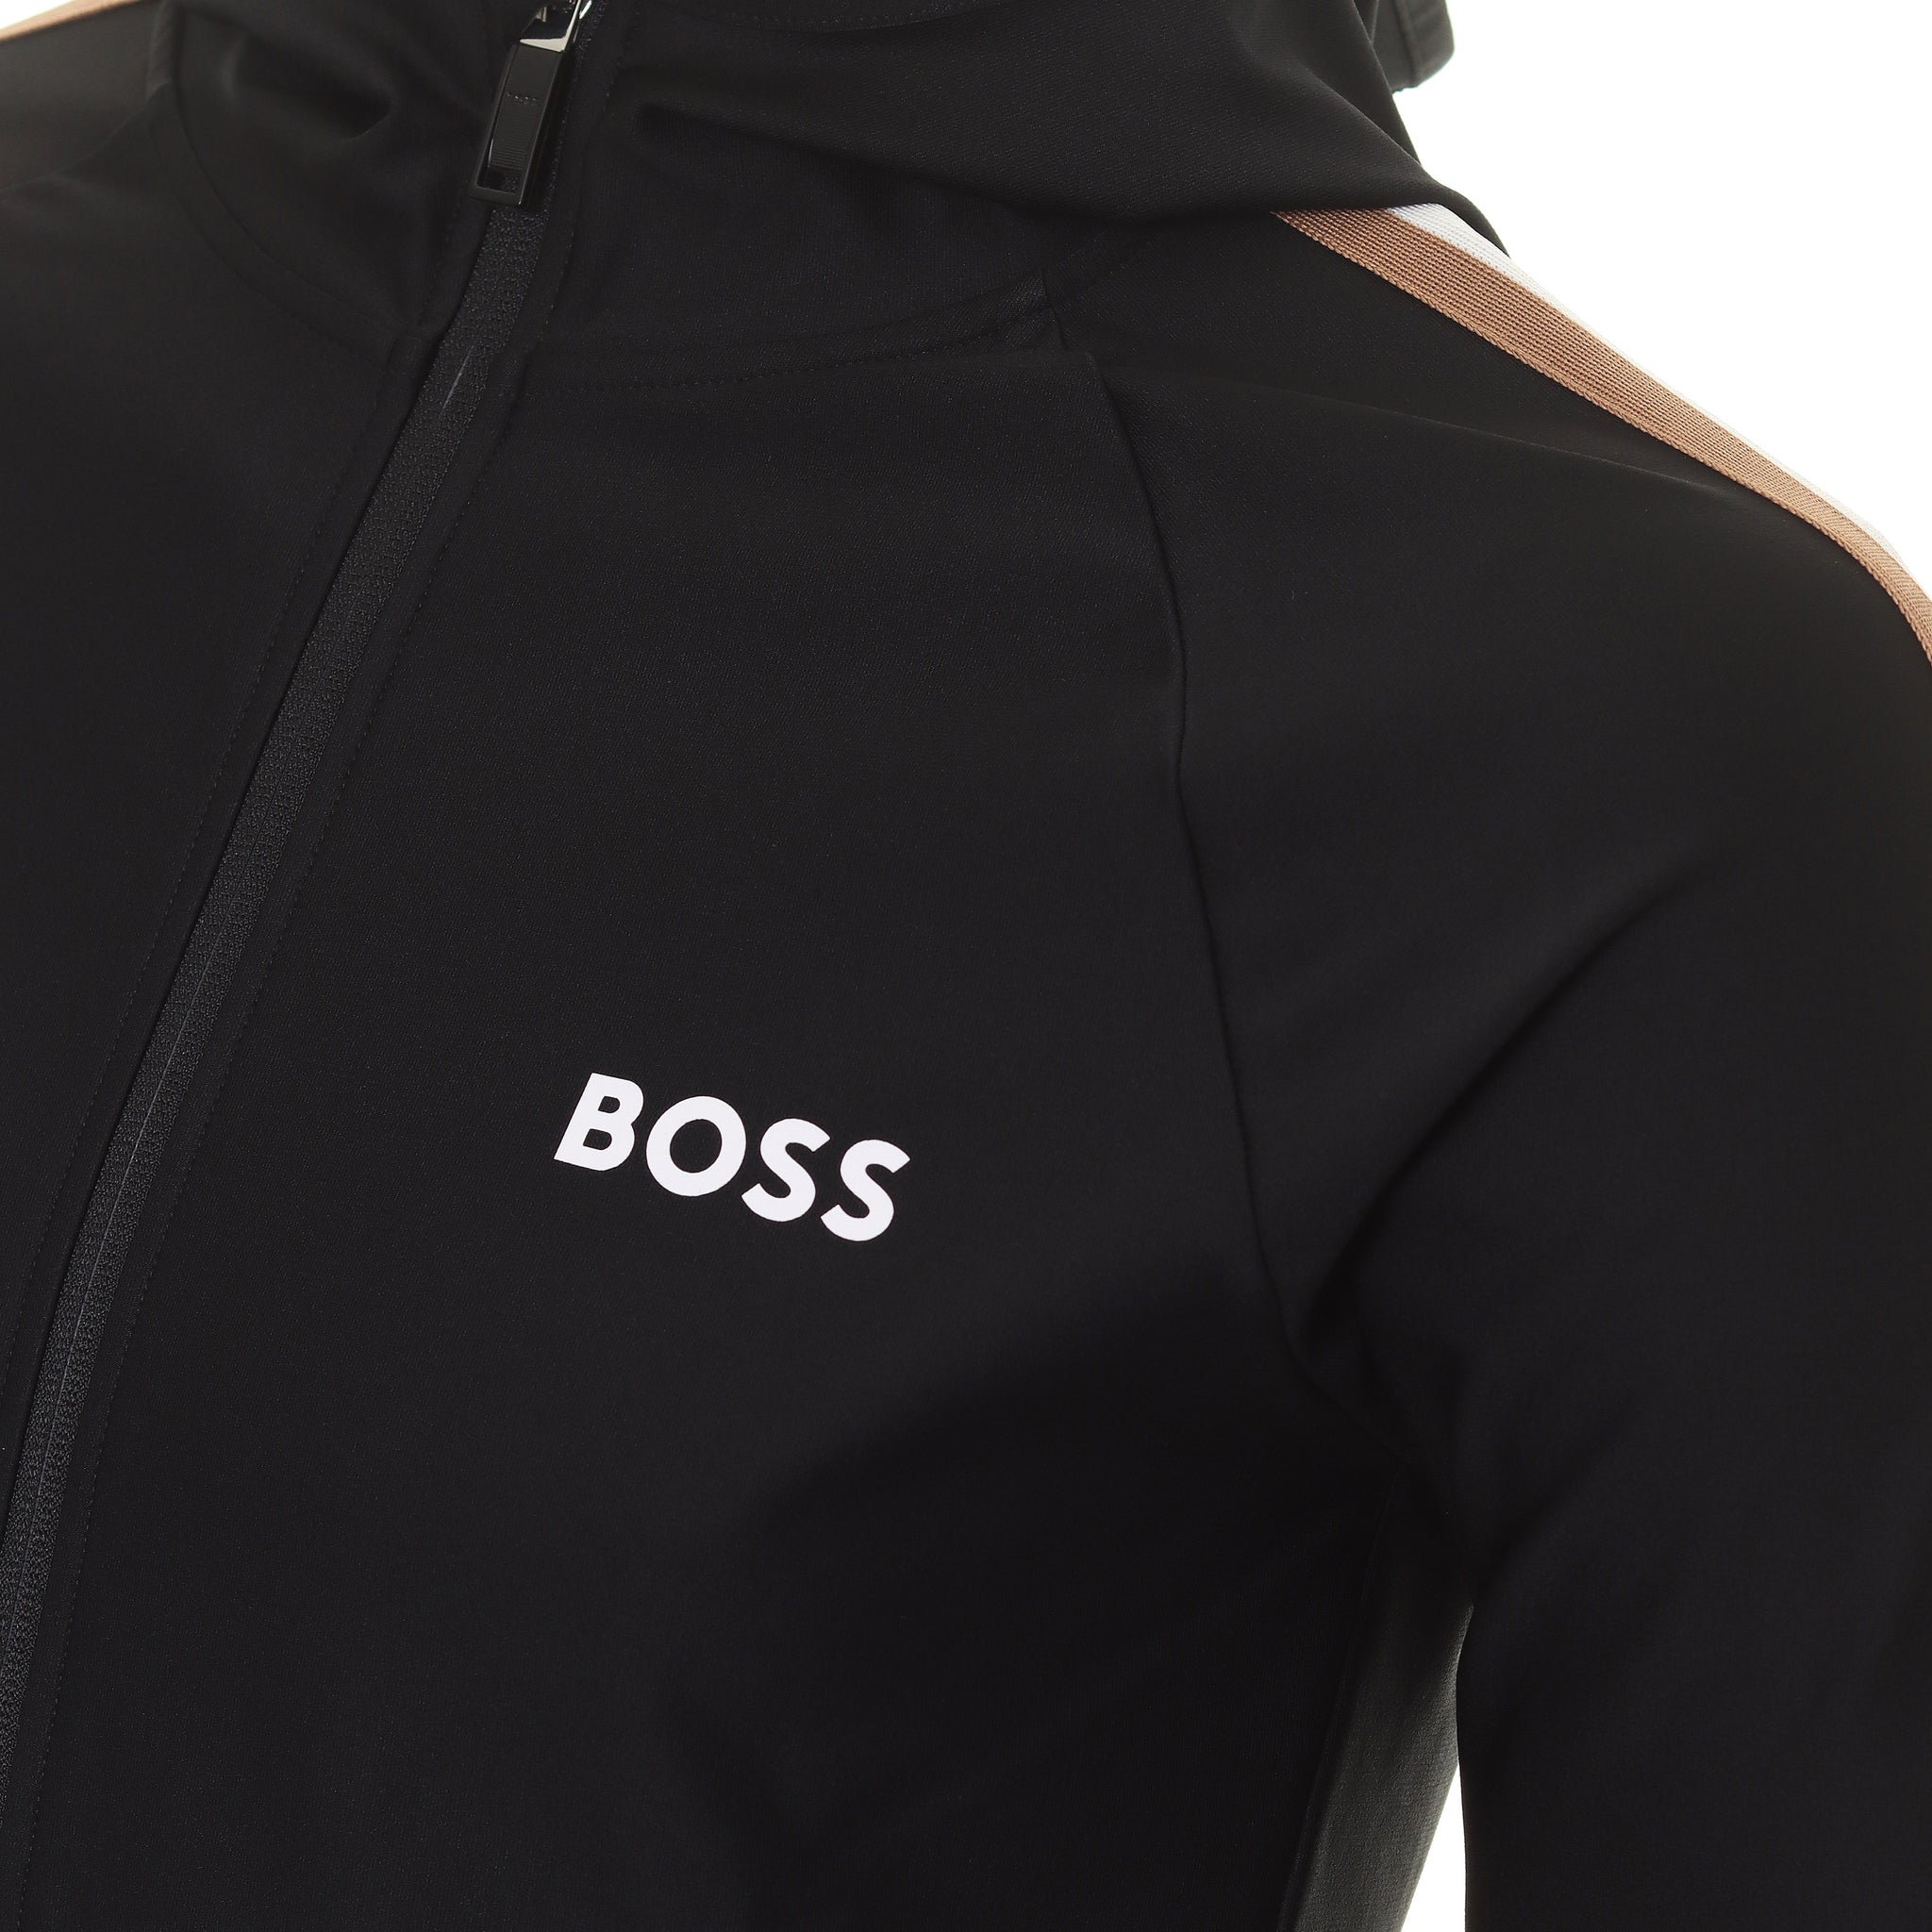 BOSS Sicon MB 1 Full Zip Hooded Mid Layer 50490646 Black 001 ...